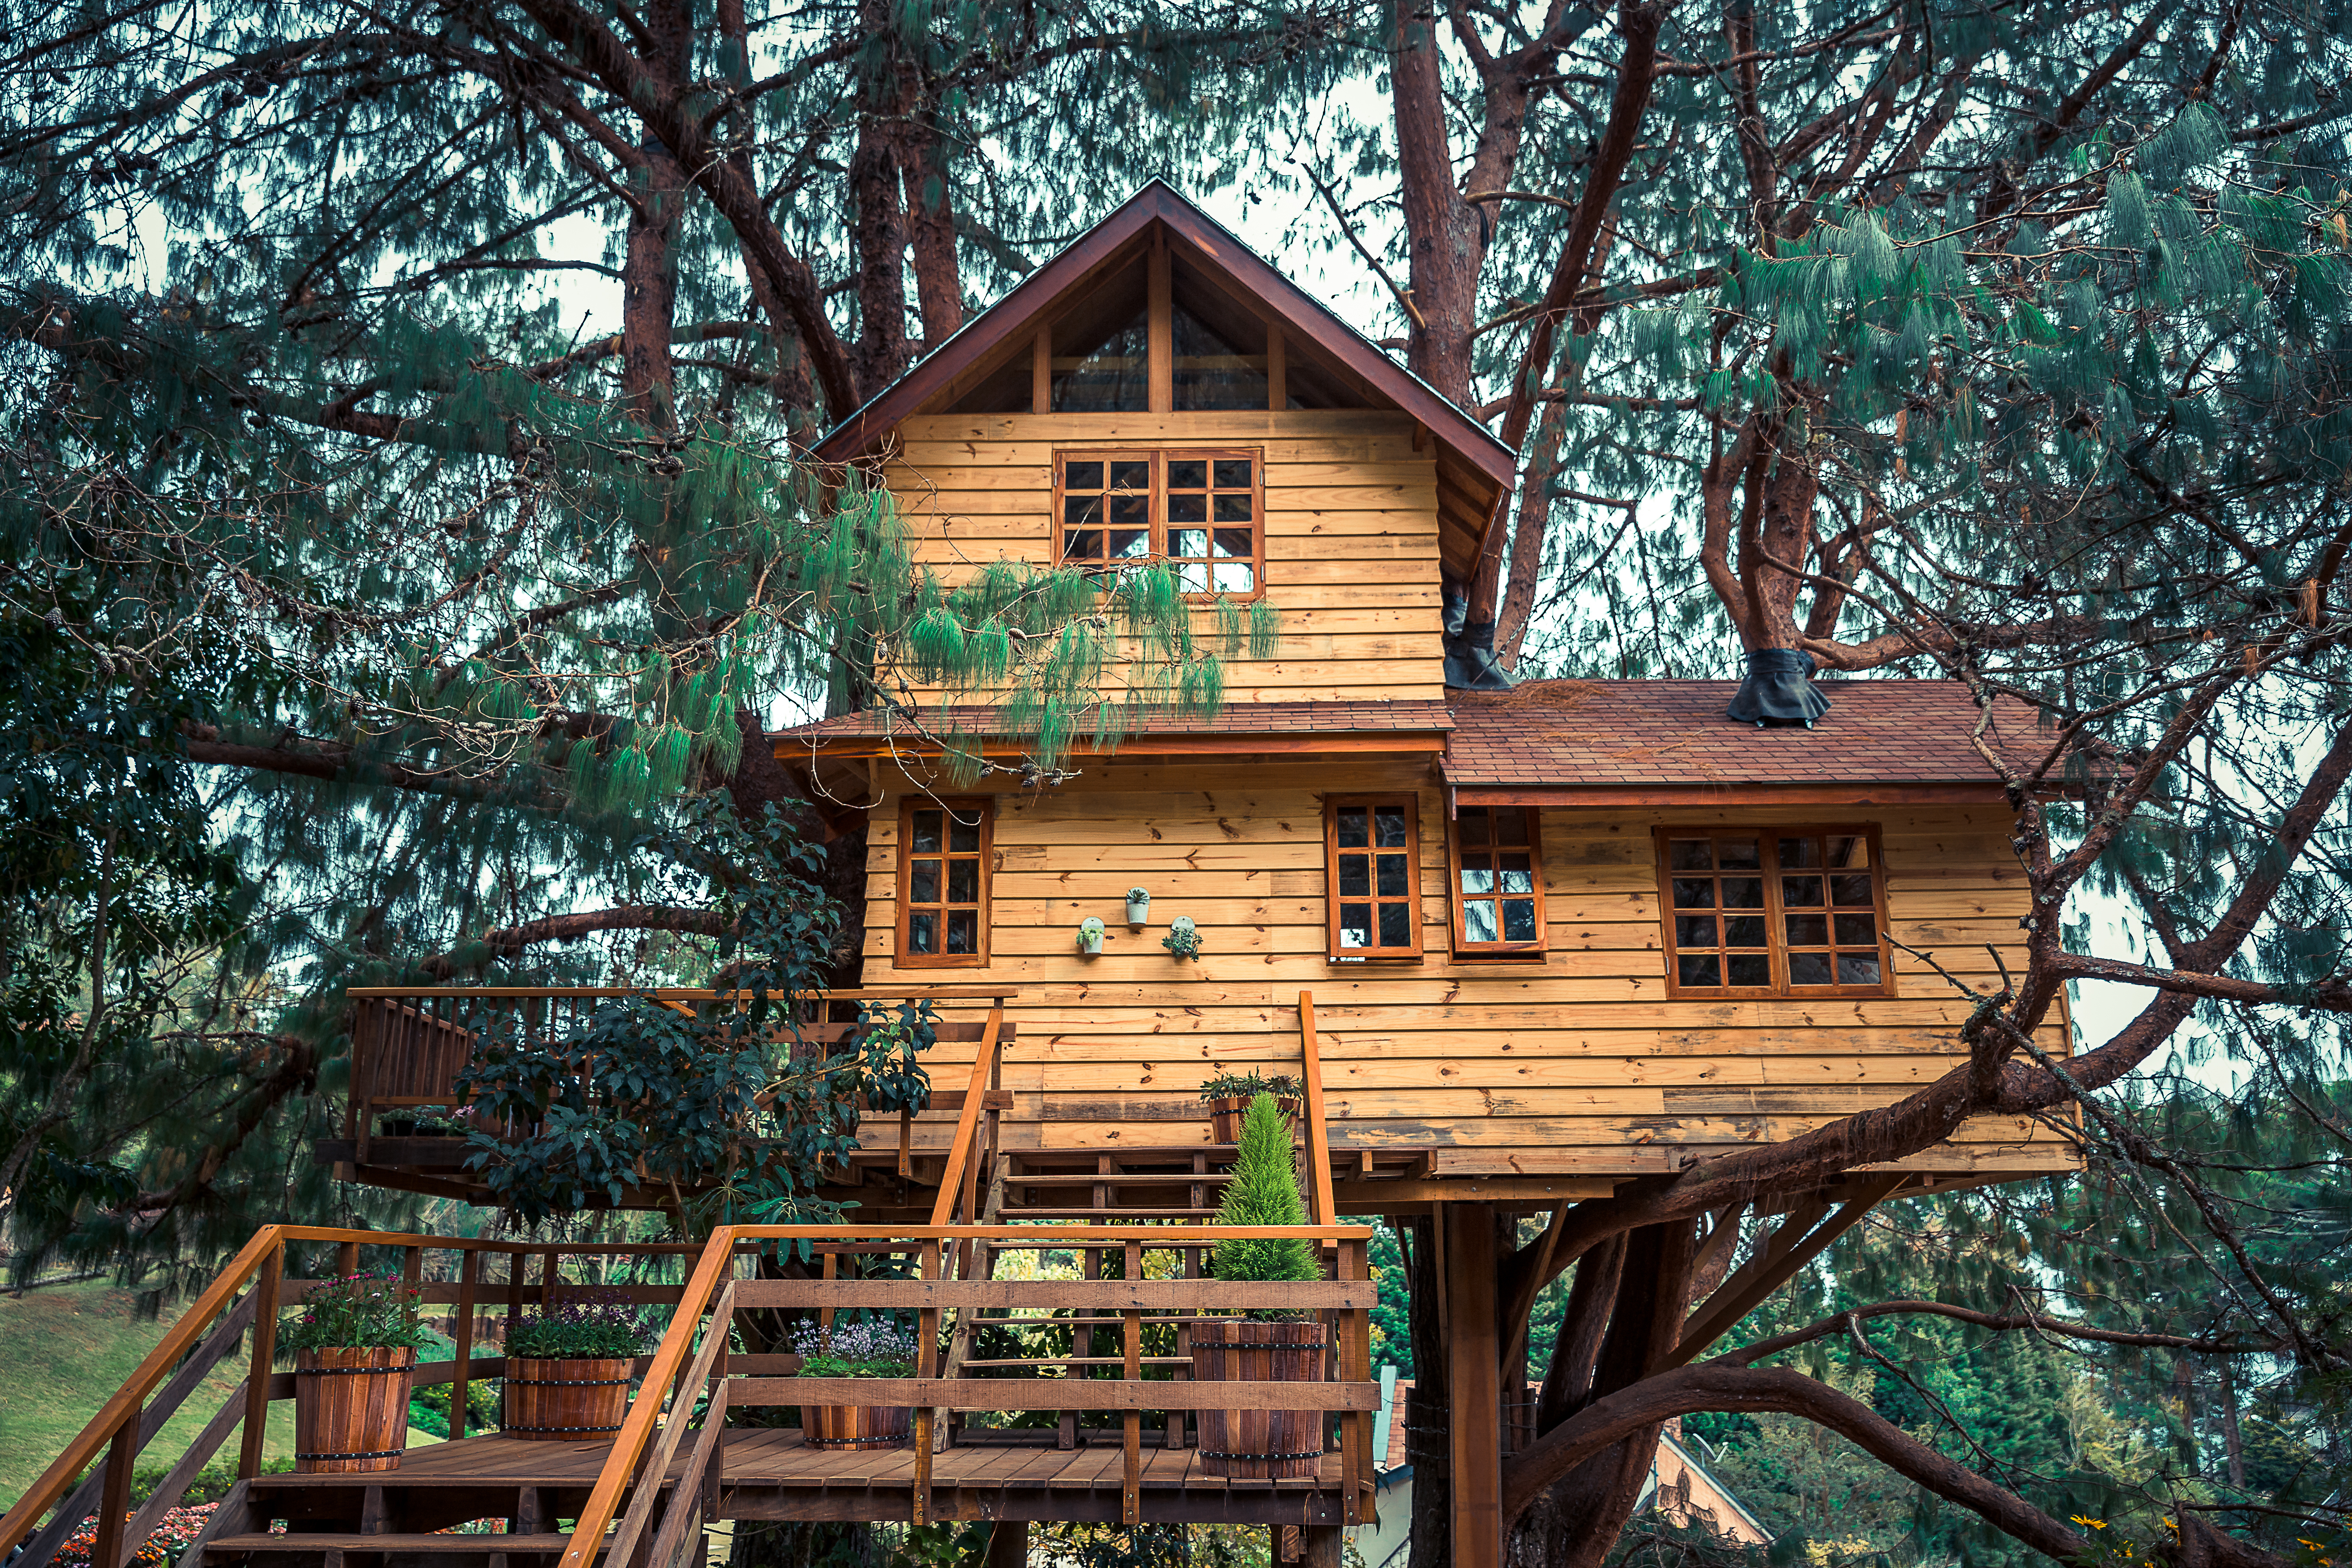 A treehouse | Source: Shutterstock